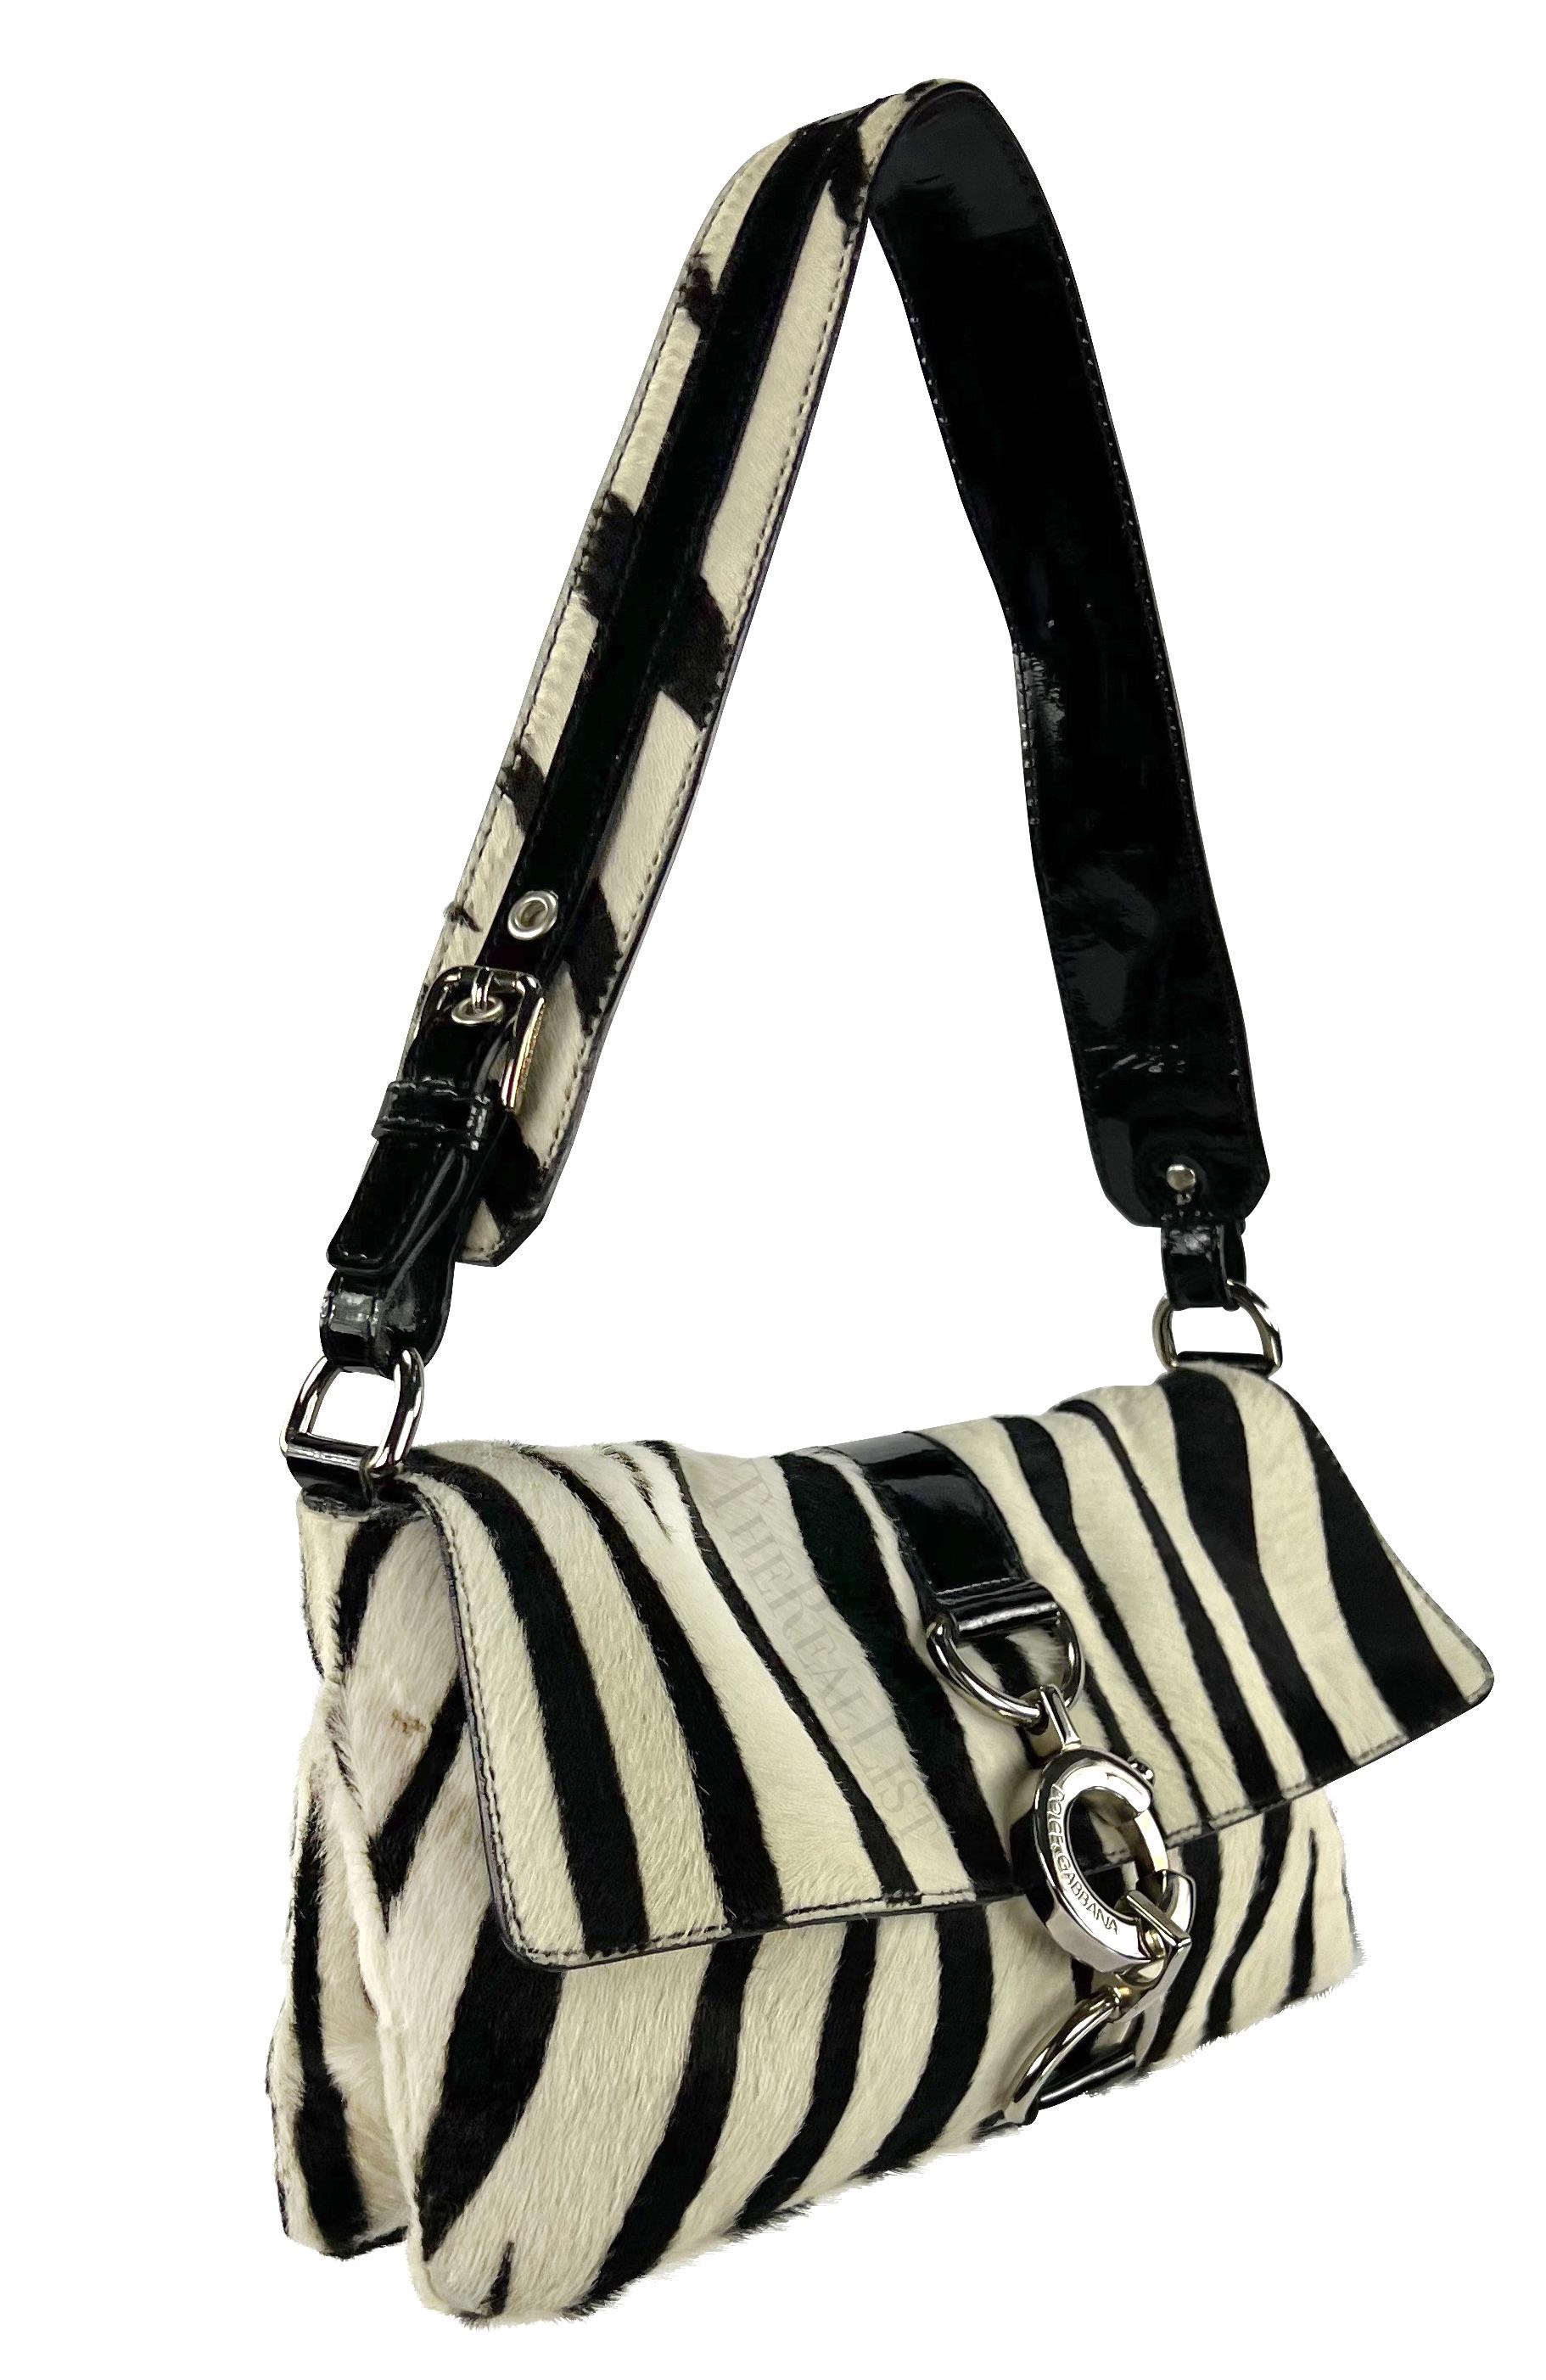 Early 2000s Dolce and Gabbana Zebra Pony Hair Patent Leather Shoulder Bag 1